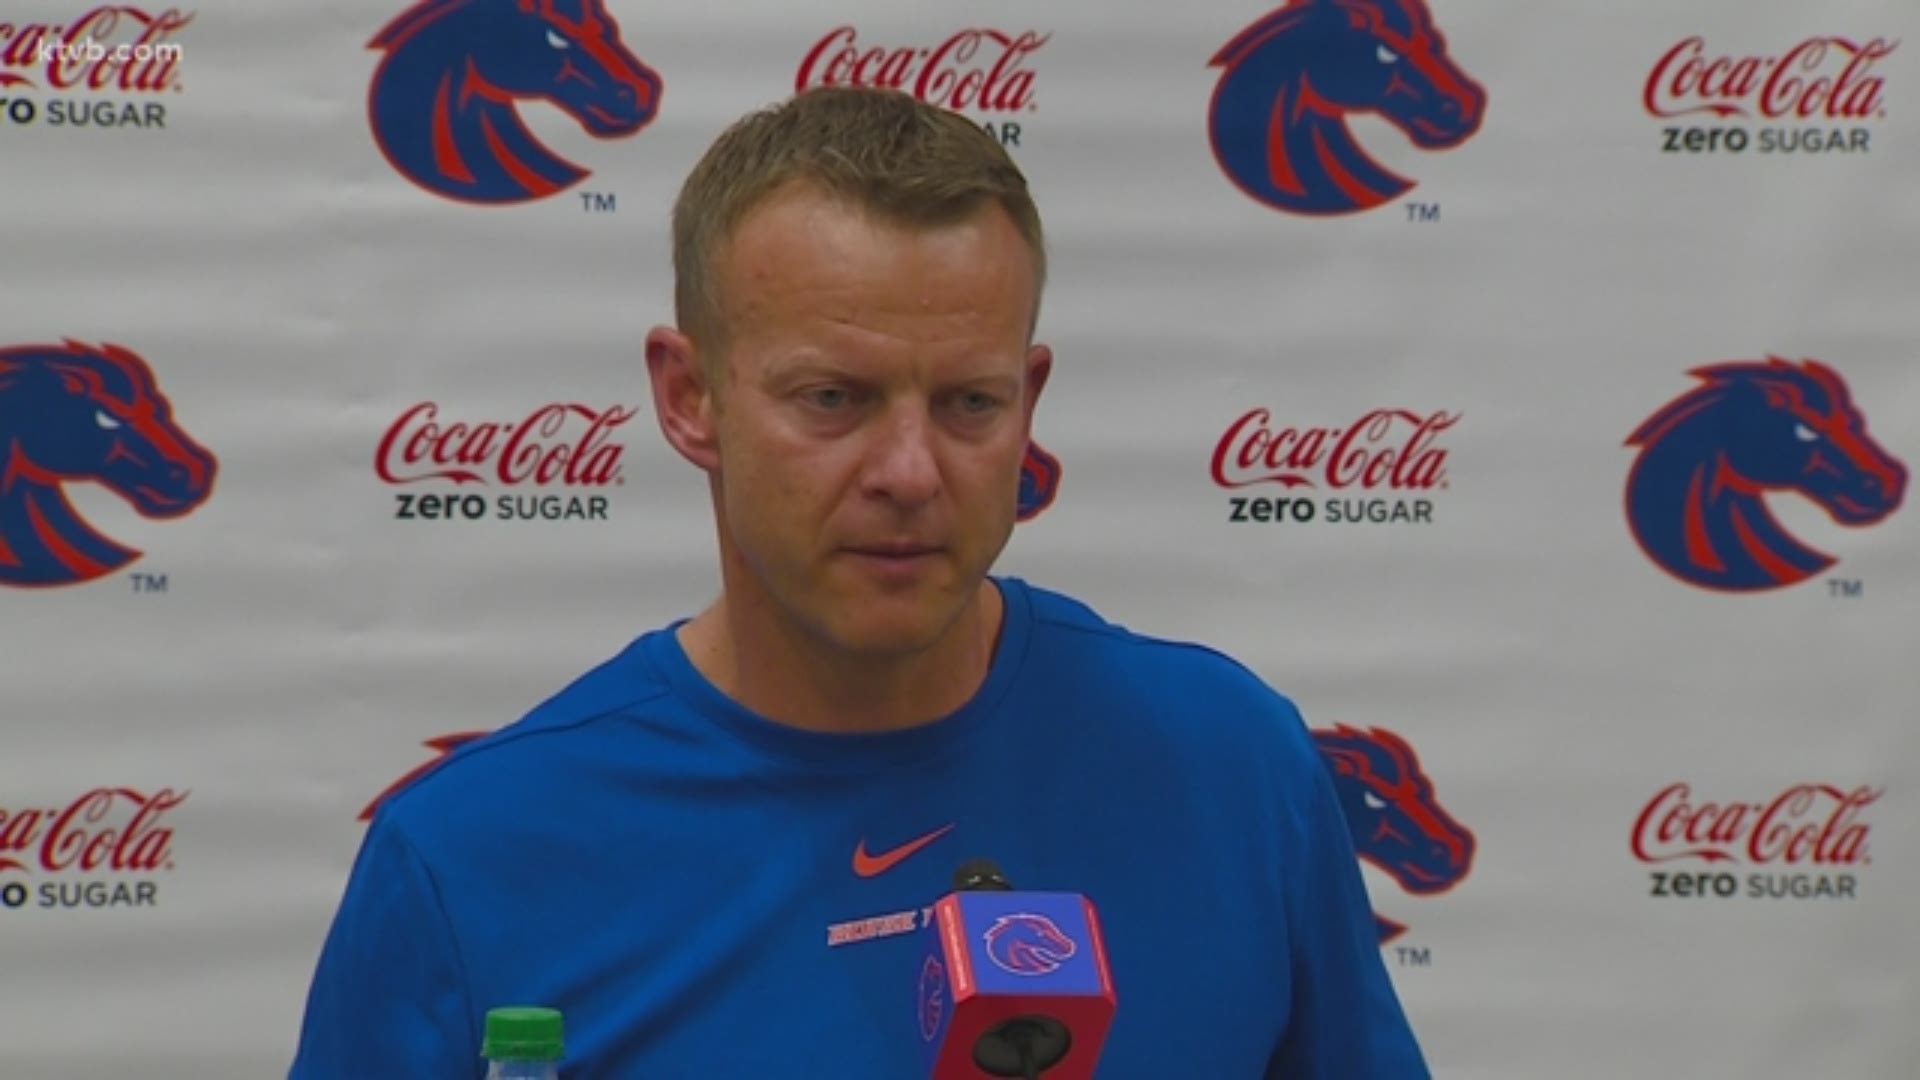 In his weekly news conference, ahead of the Wyoming Cowboys game, Coach Harsin talks about what it's like for freshman players to adjust to life on the team.